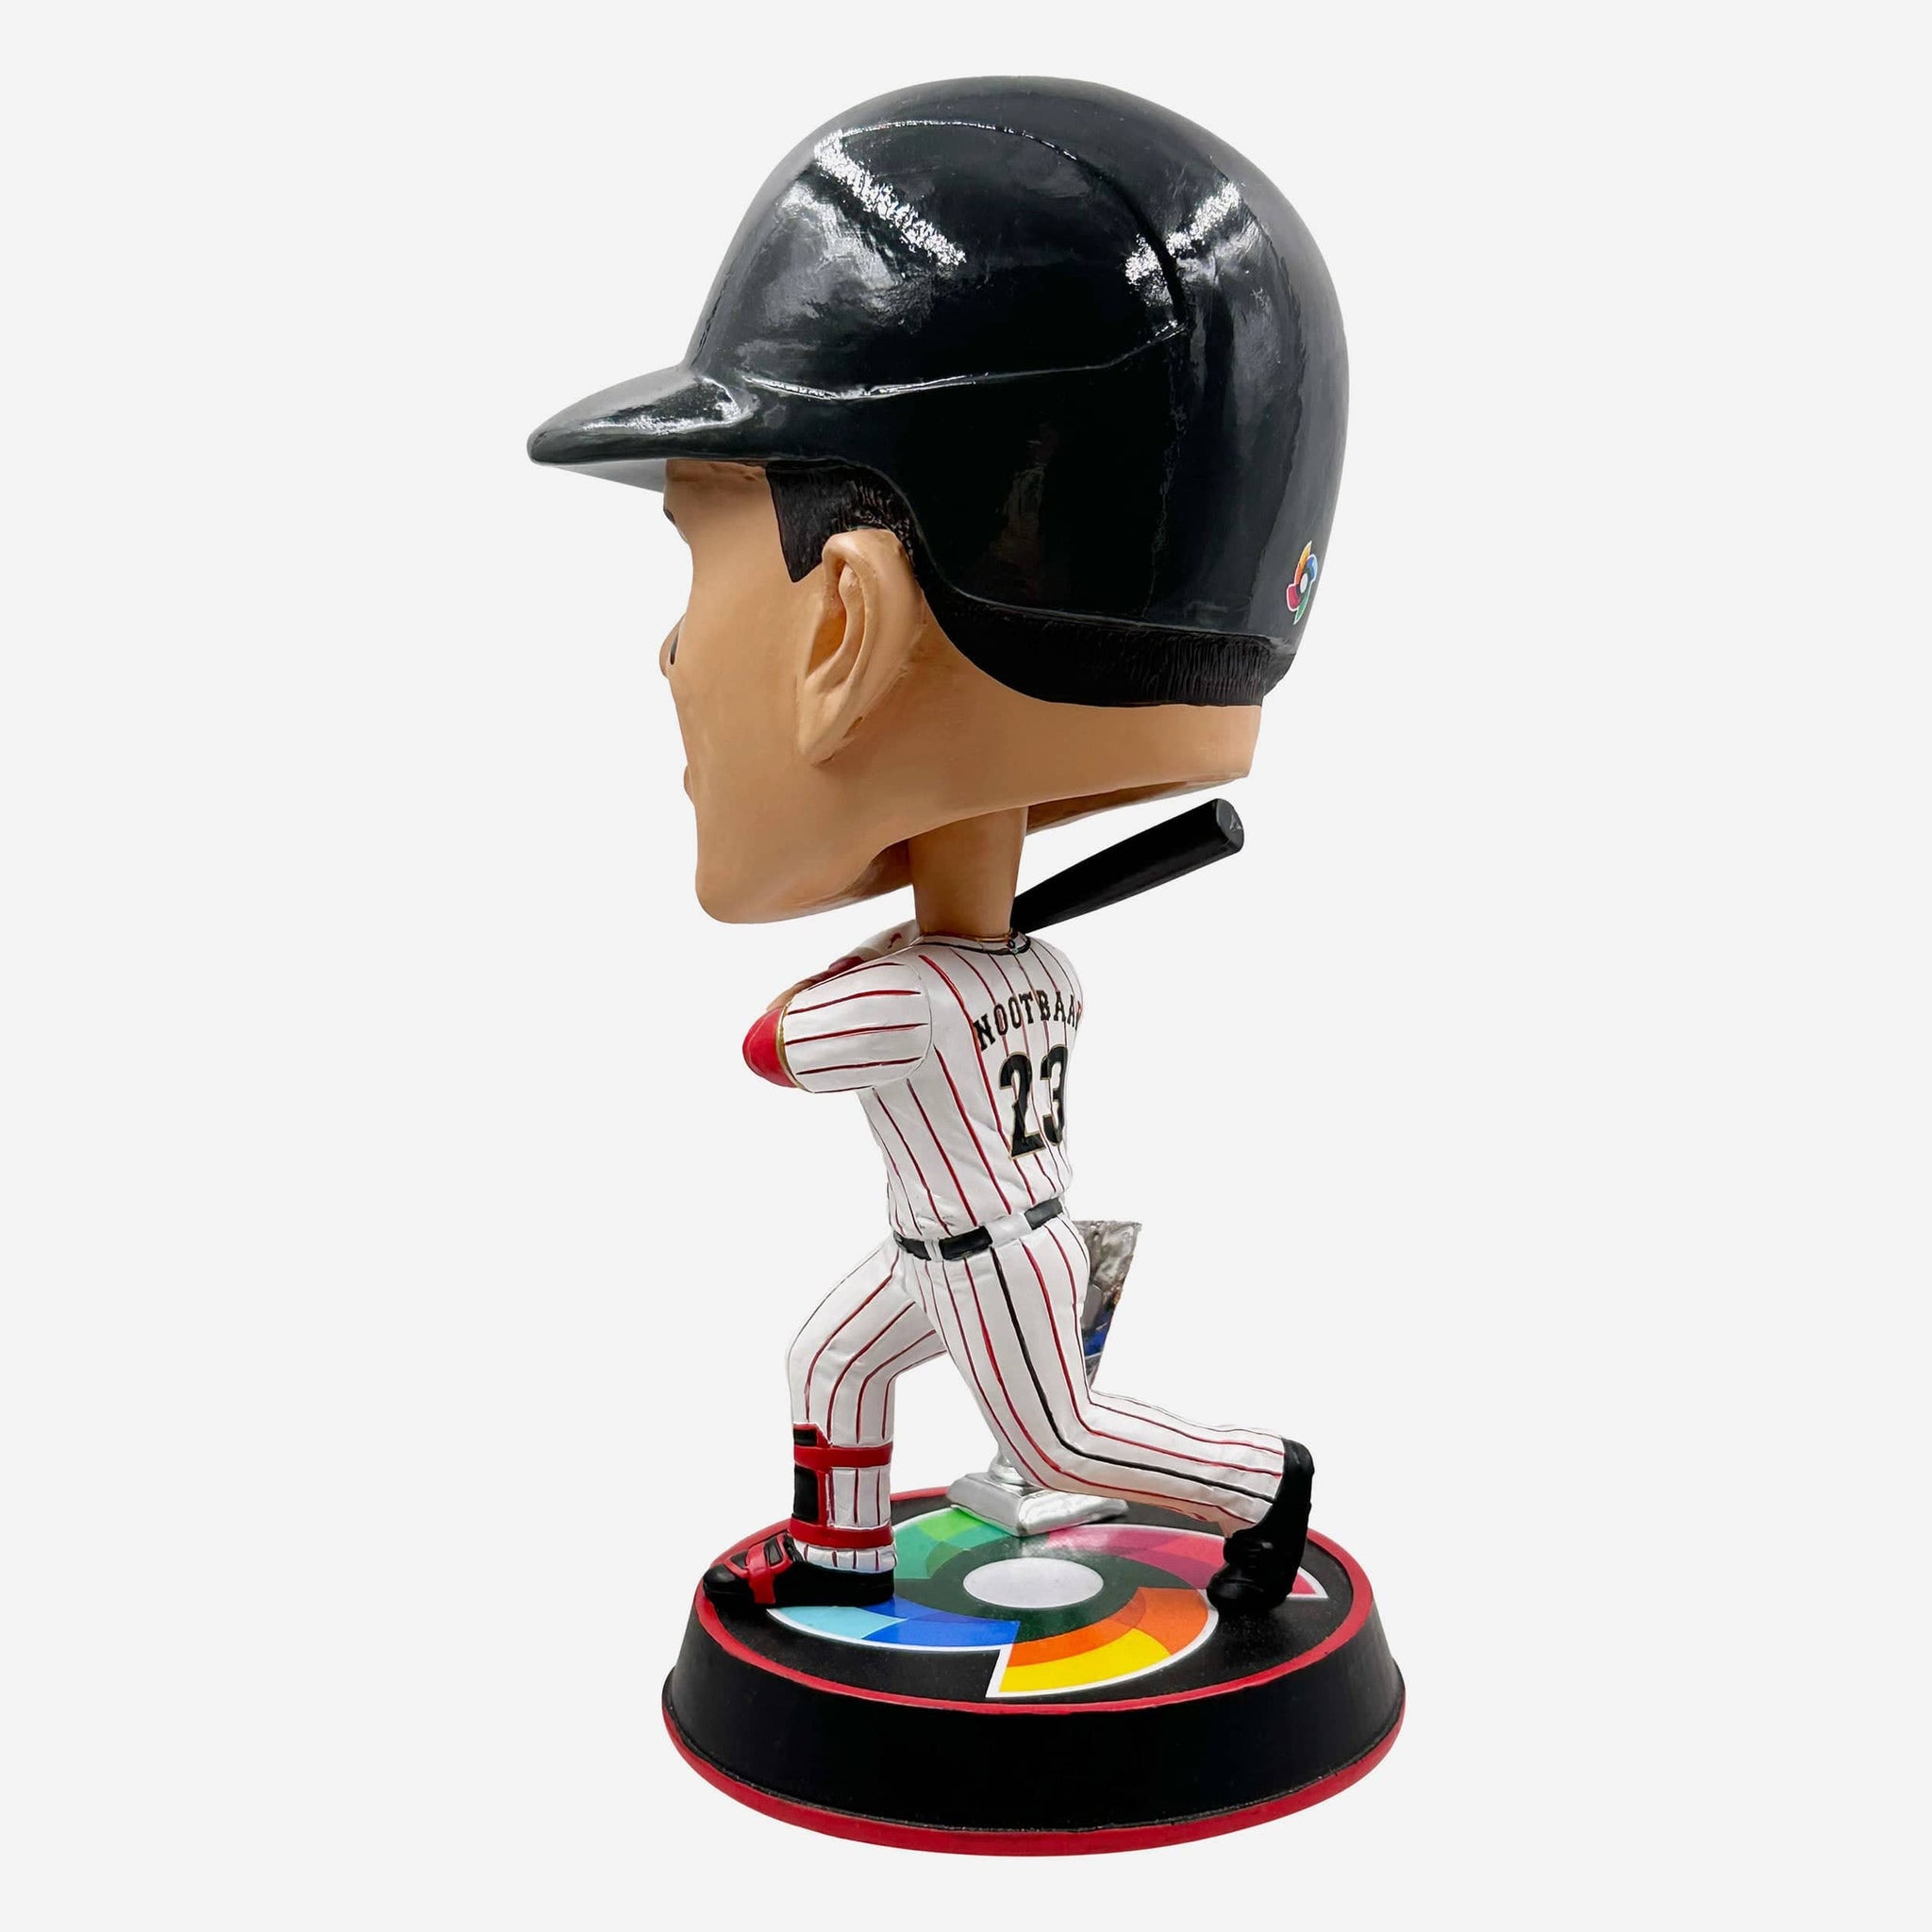 Lars Nootbaar “Grind the Pepper” Bobbleheads unveiled - Guarantee yours now  before they sell out!